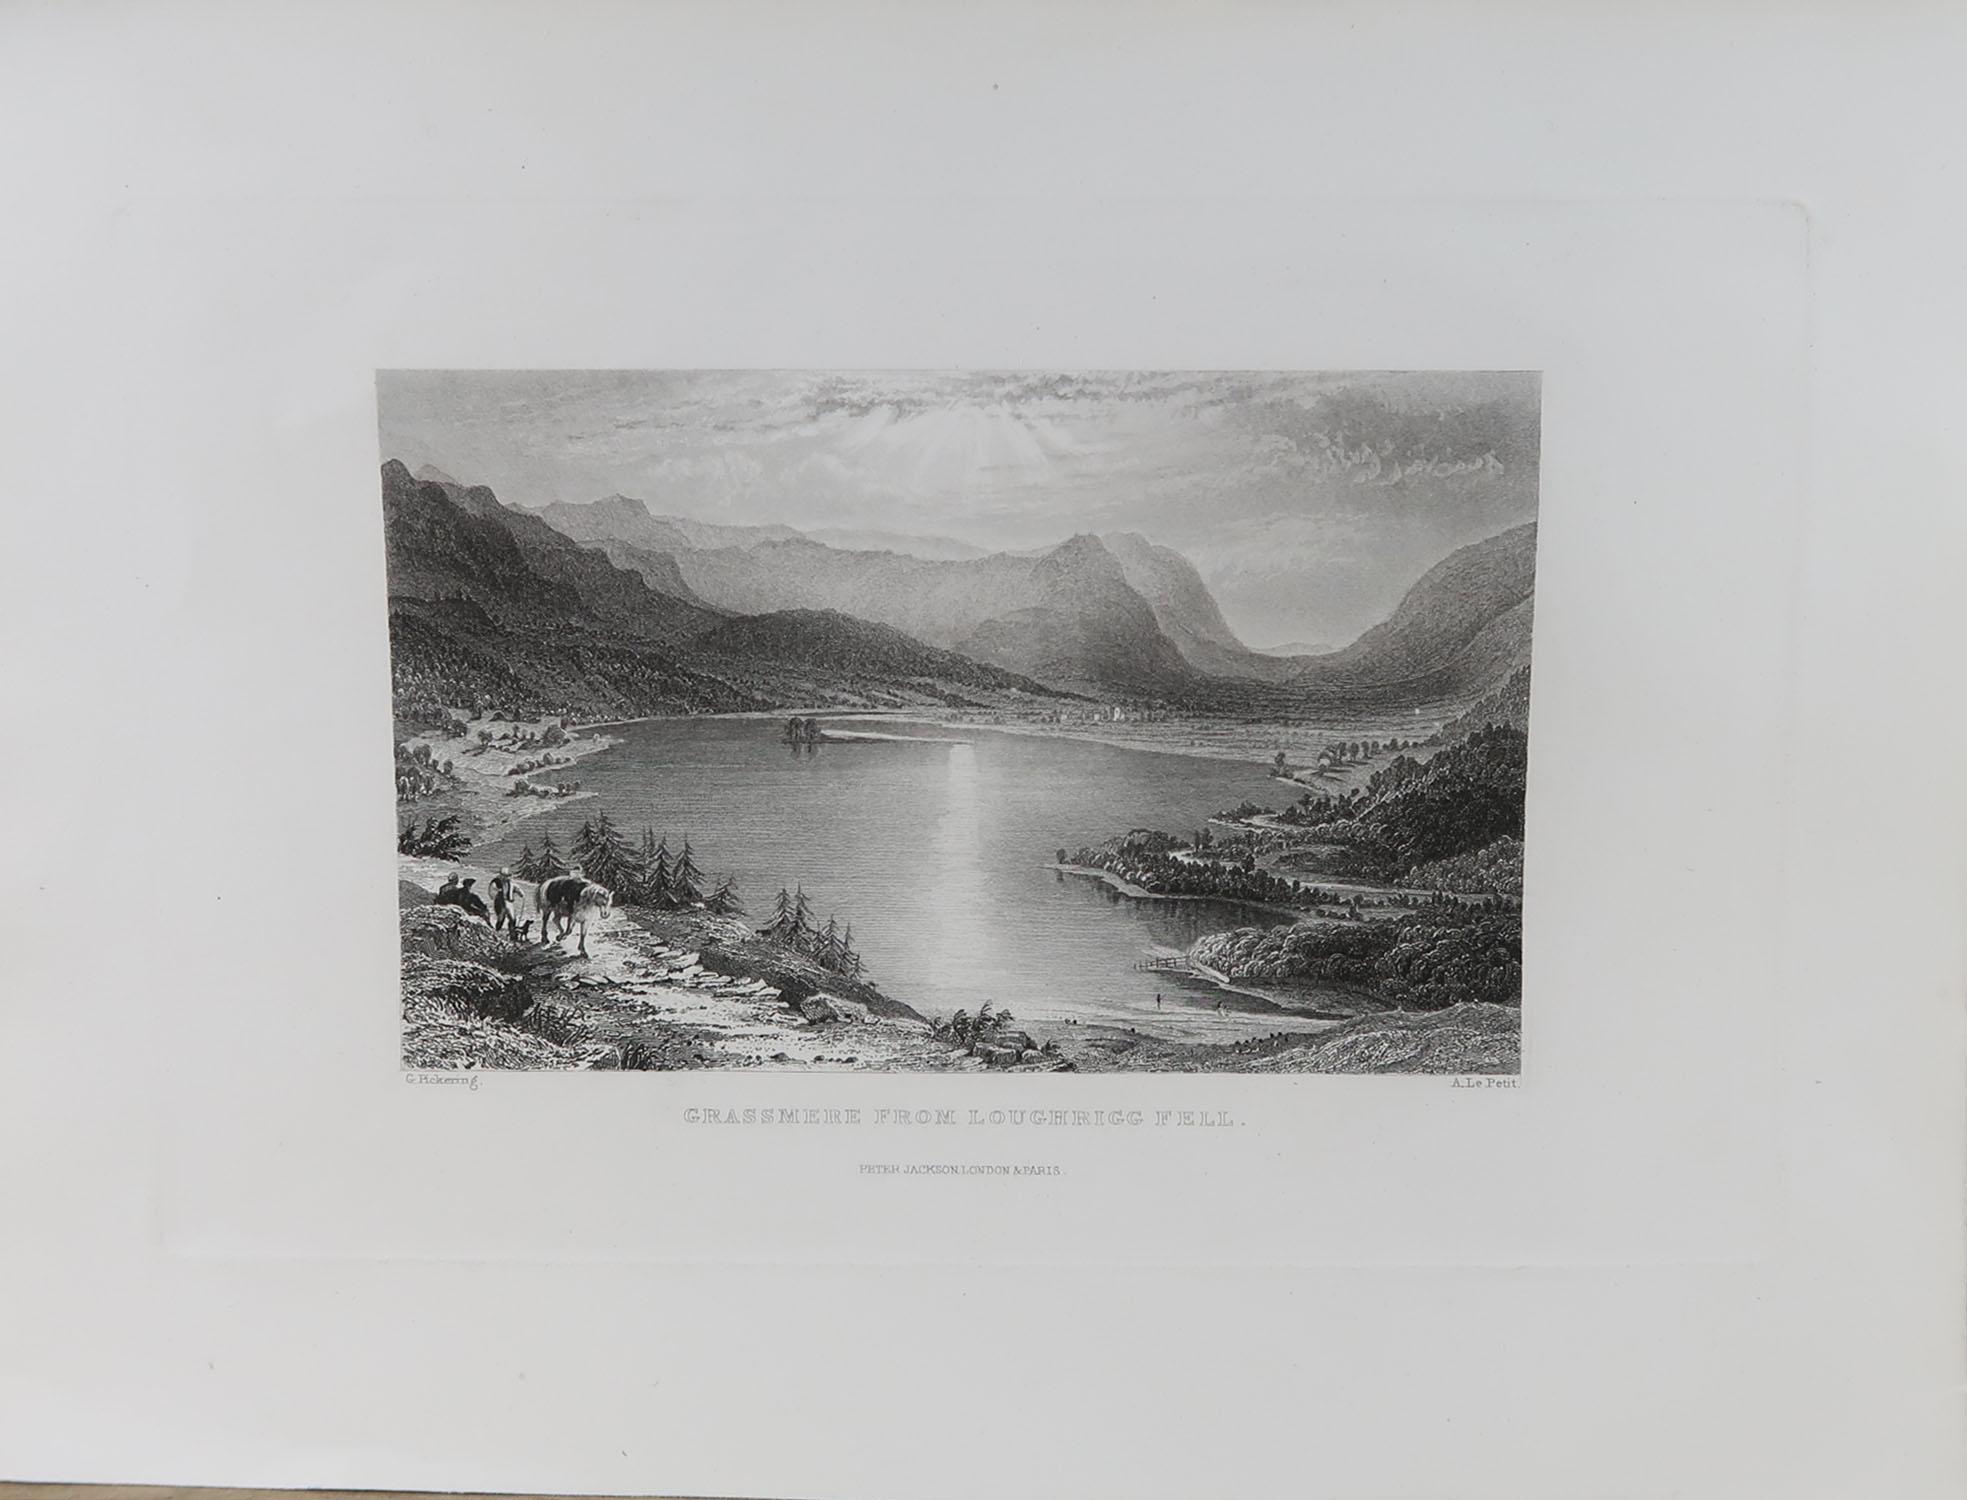 Other Set of 15 Antique Prints of the English Lake District, circa 1830